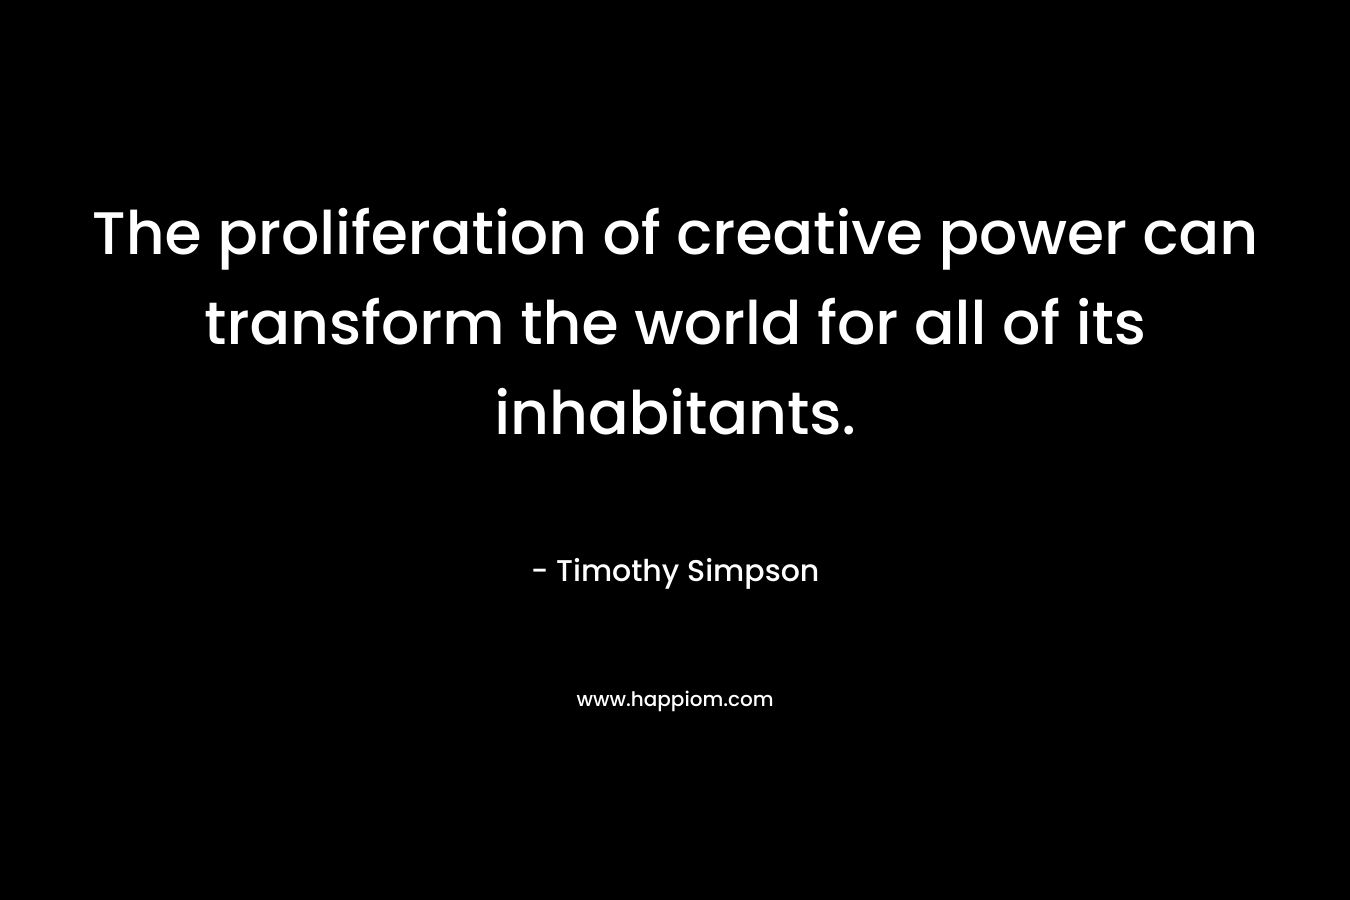 The proliferation of creative power can transform the world for all of its inhabitants. – Timothy Simpson